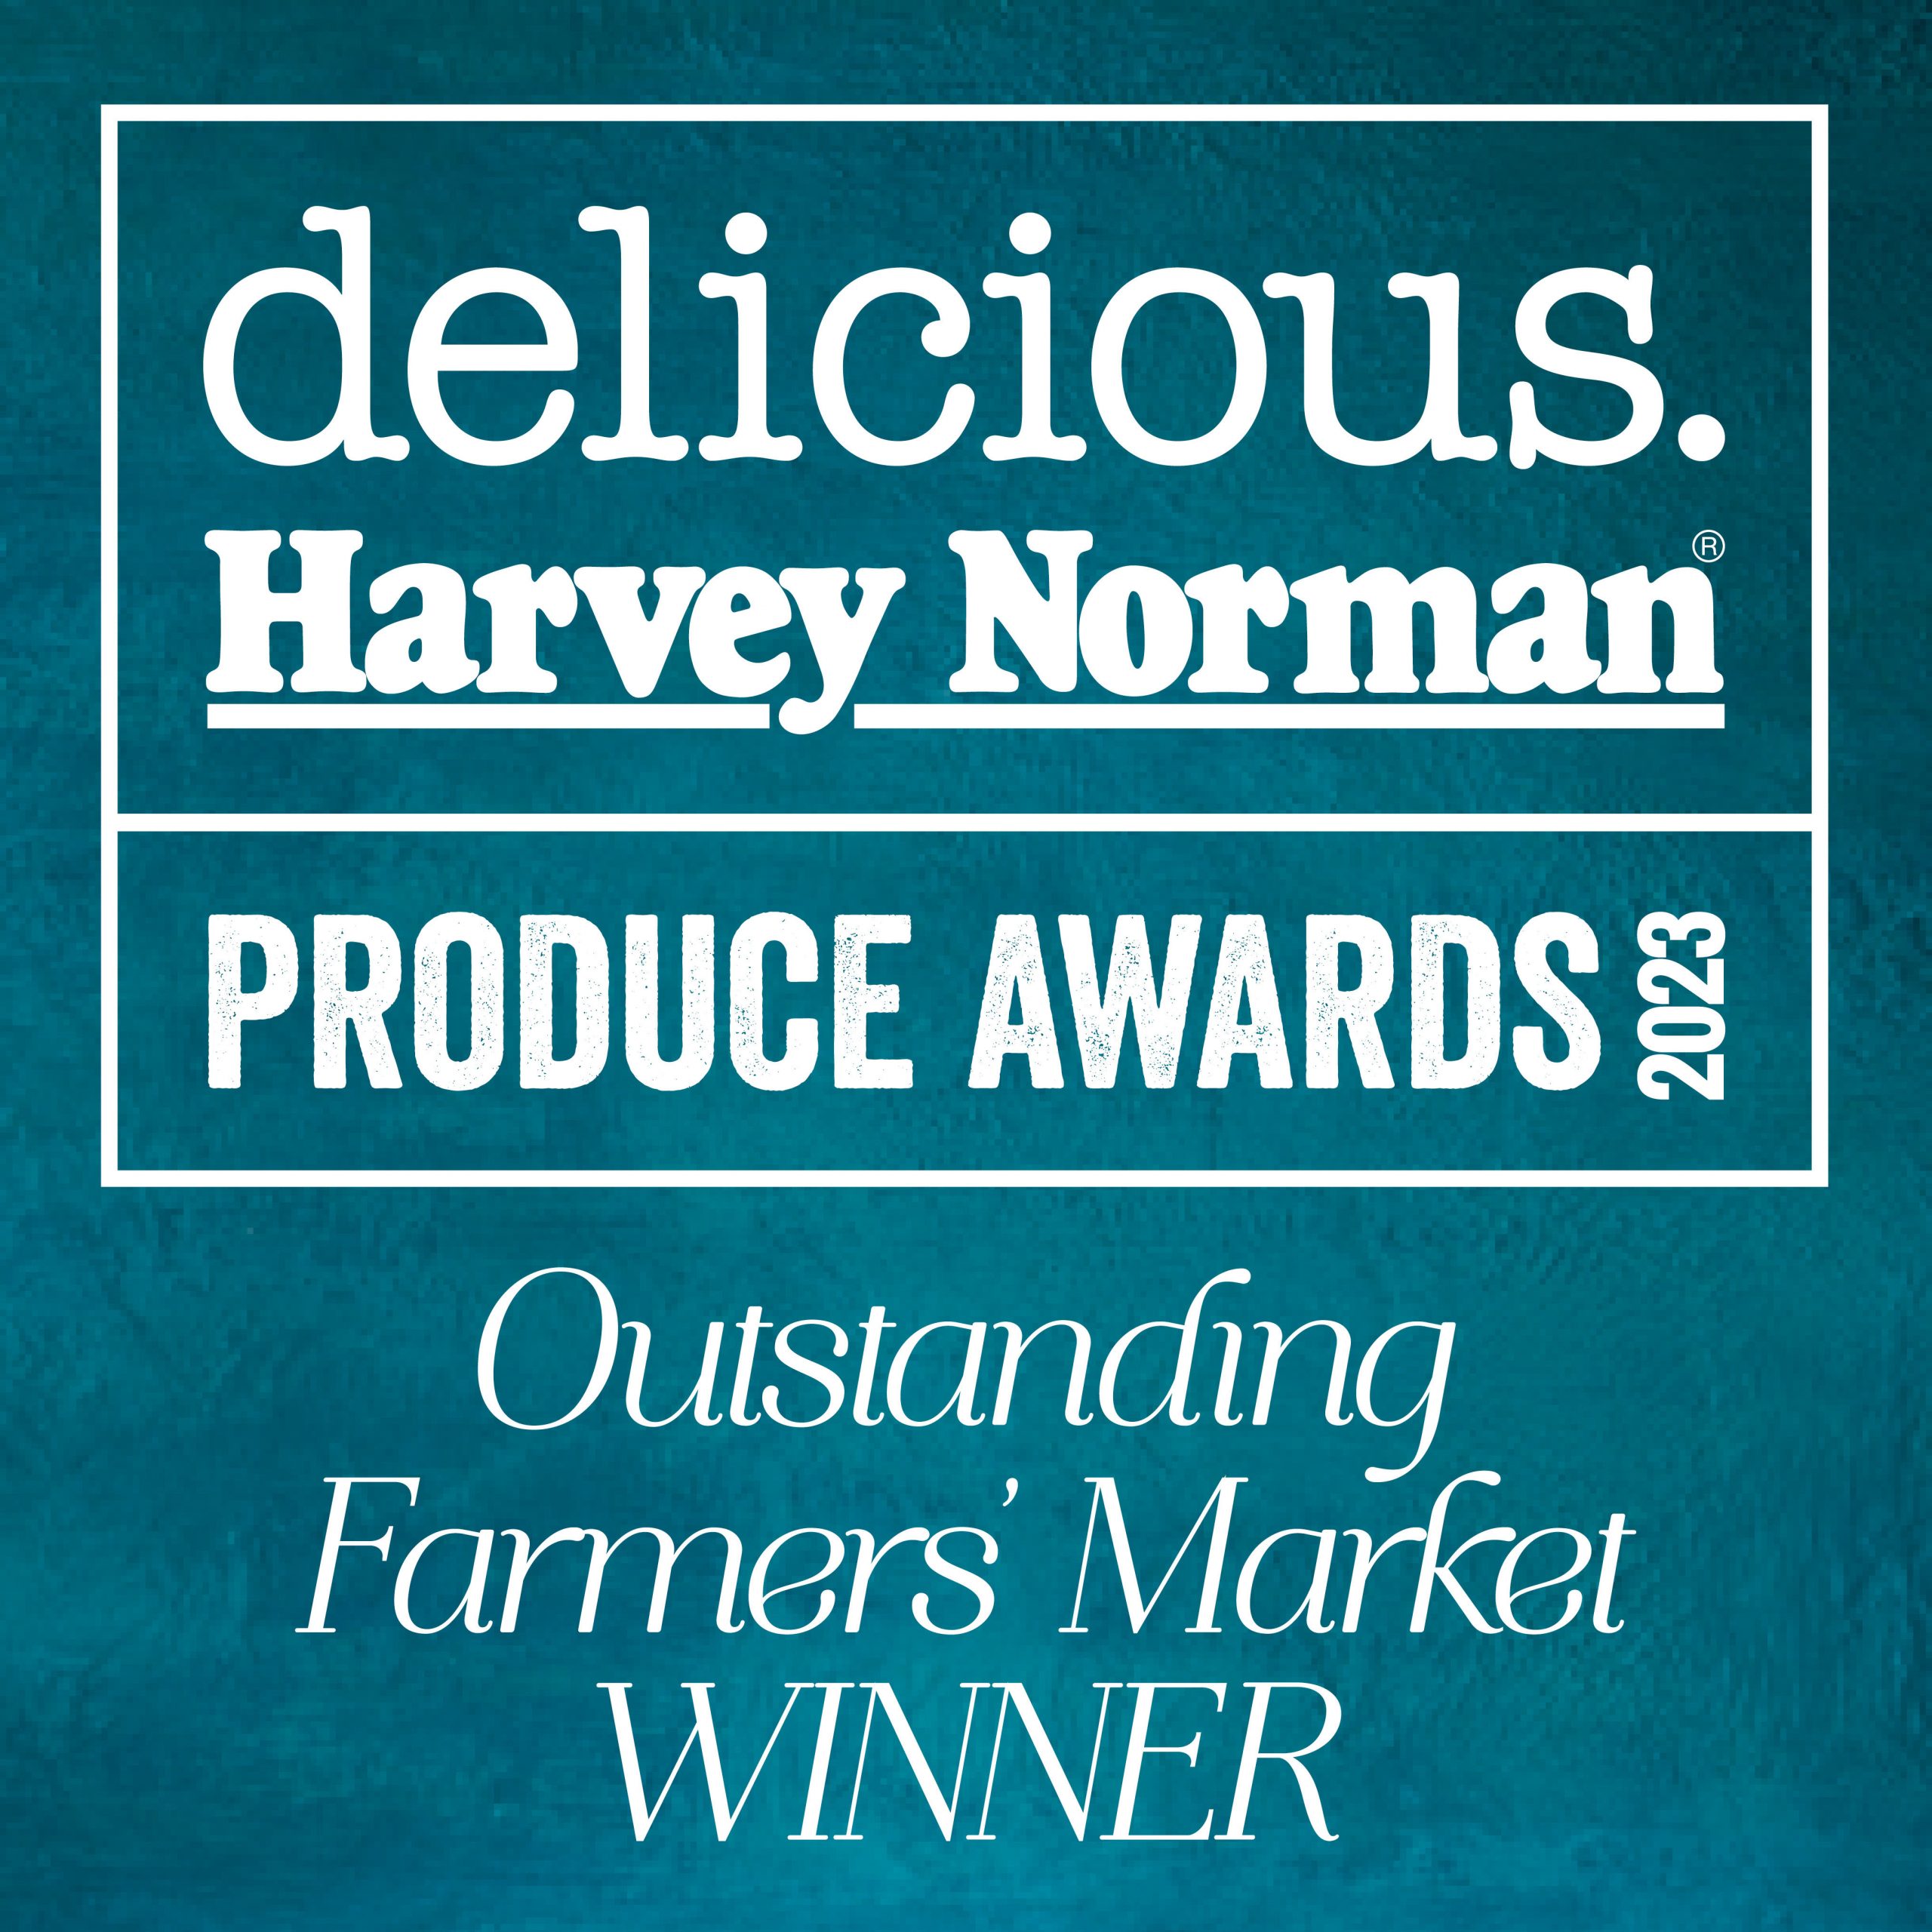 You are currently viewing Murbah Farmers’ Market winner of “Outstanding Farmers’ Market (Australia) – Readers’ Choice Award”